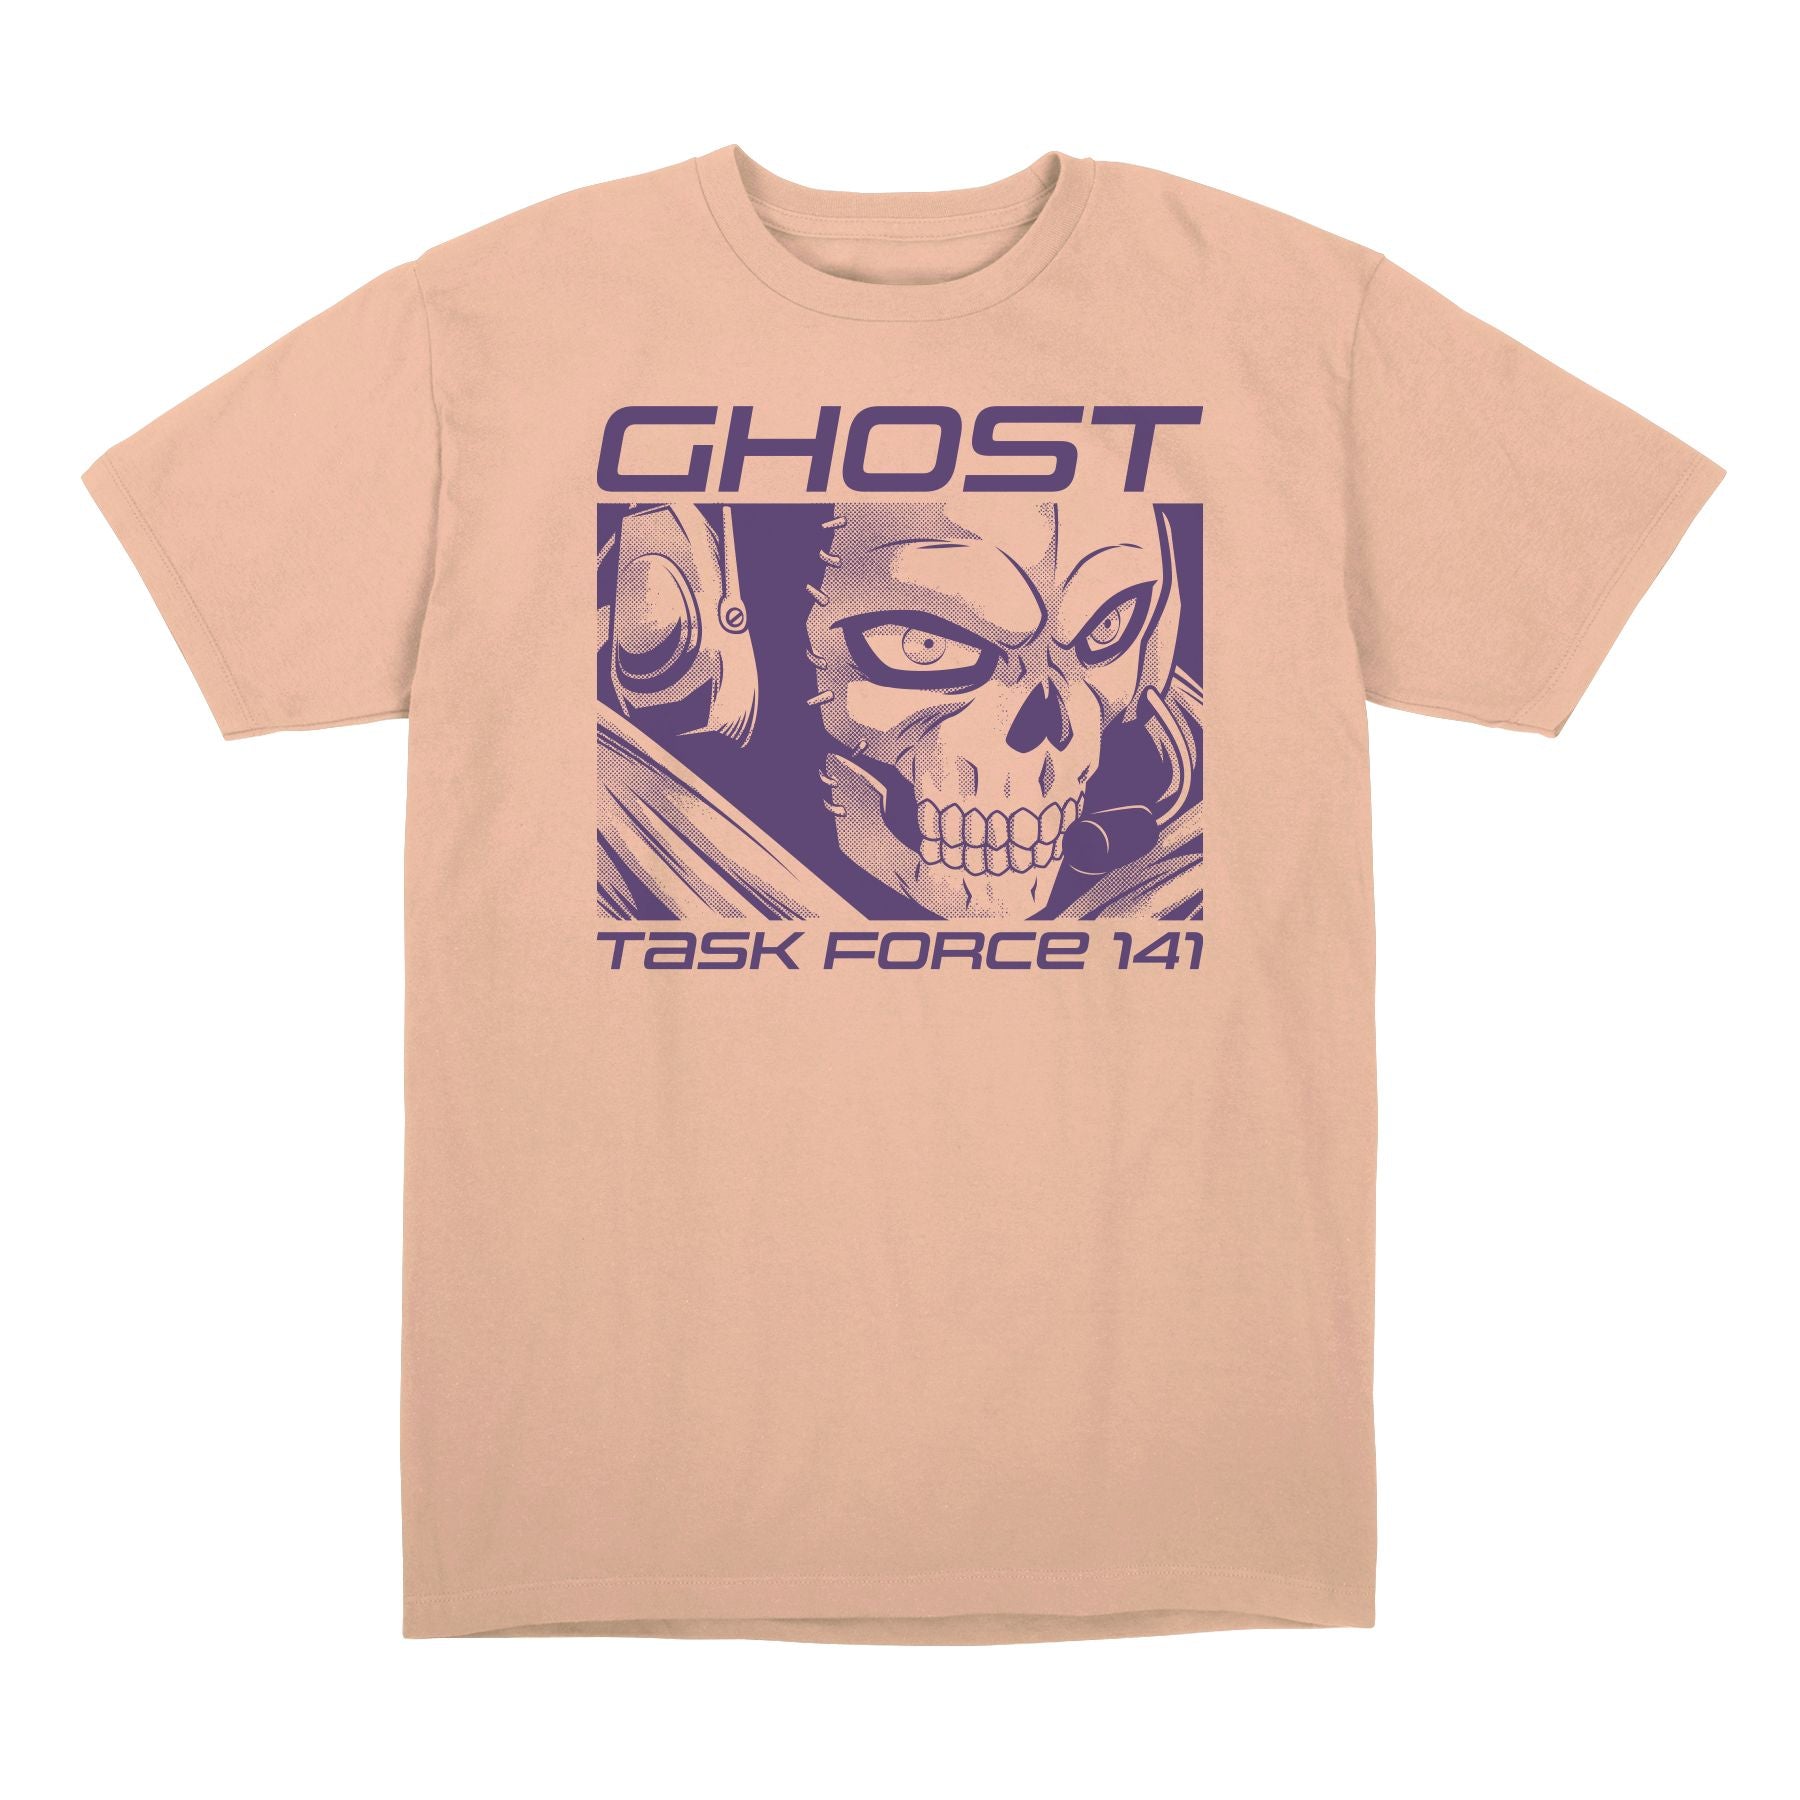 Call of Duty Anime Ghost Sand T-Shirt - Front View